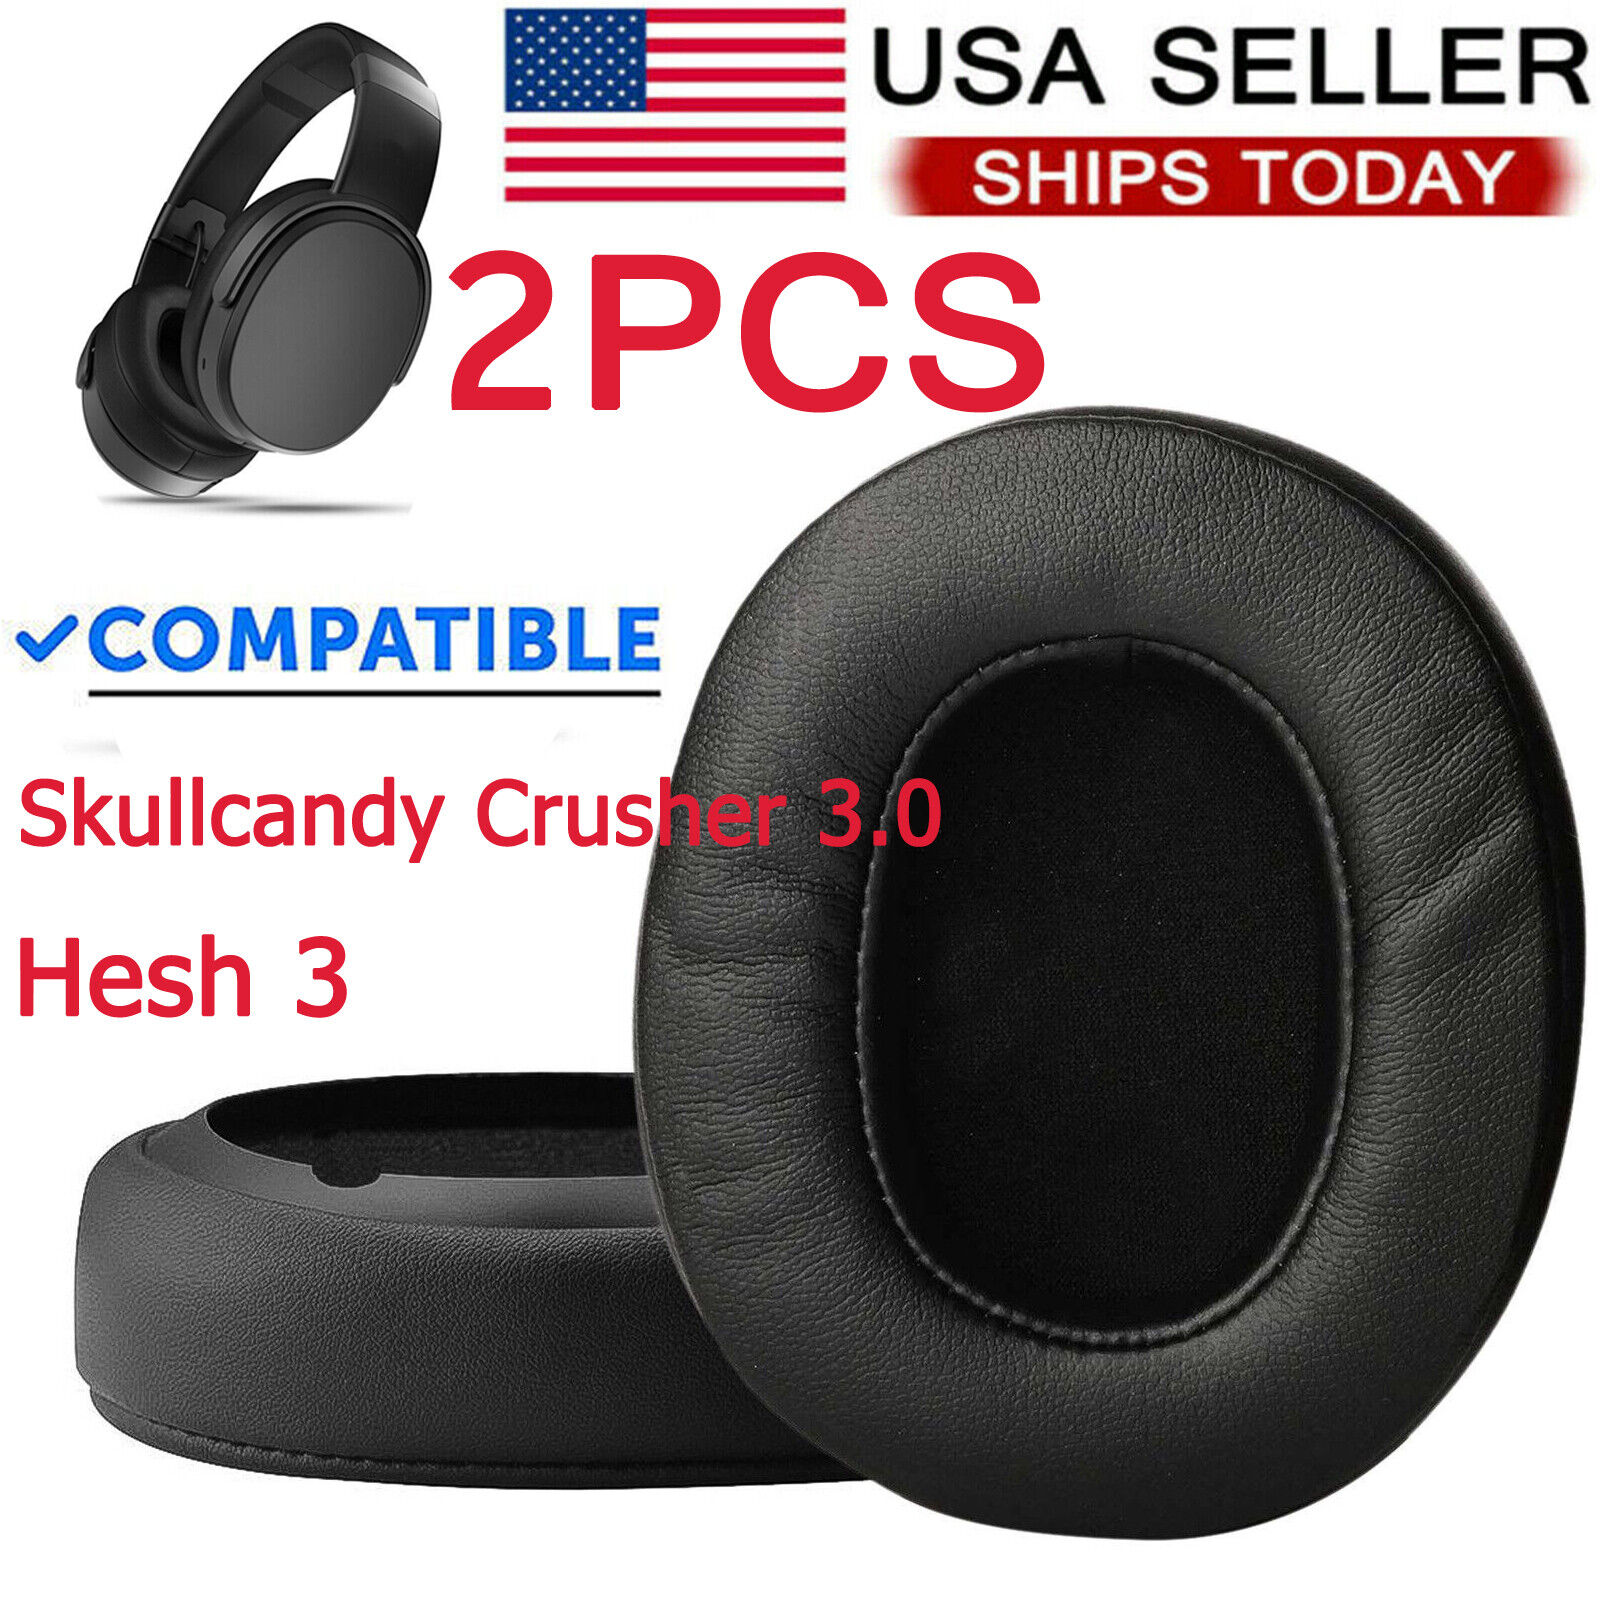 Replacement Ear Pads Cushions Covers For Skullcandy Crusher 3.0 Wireless Hesh 3